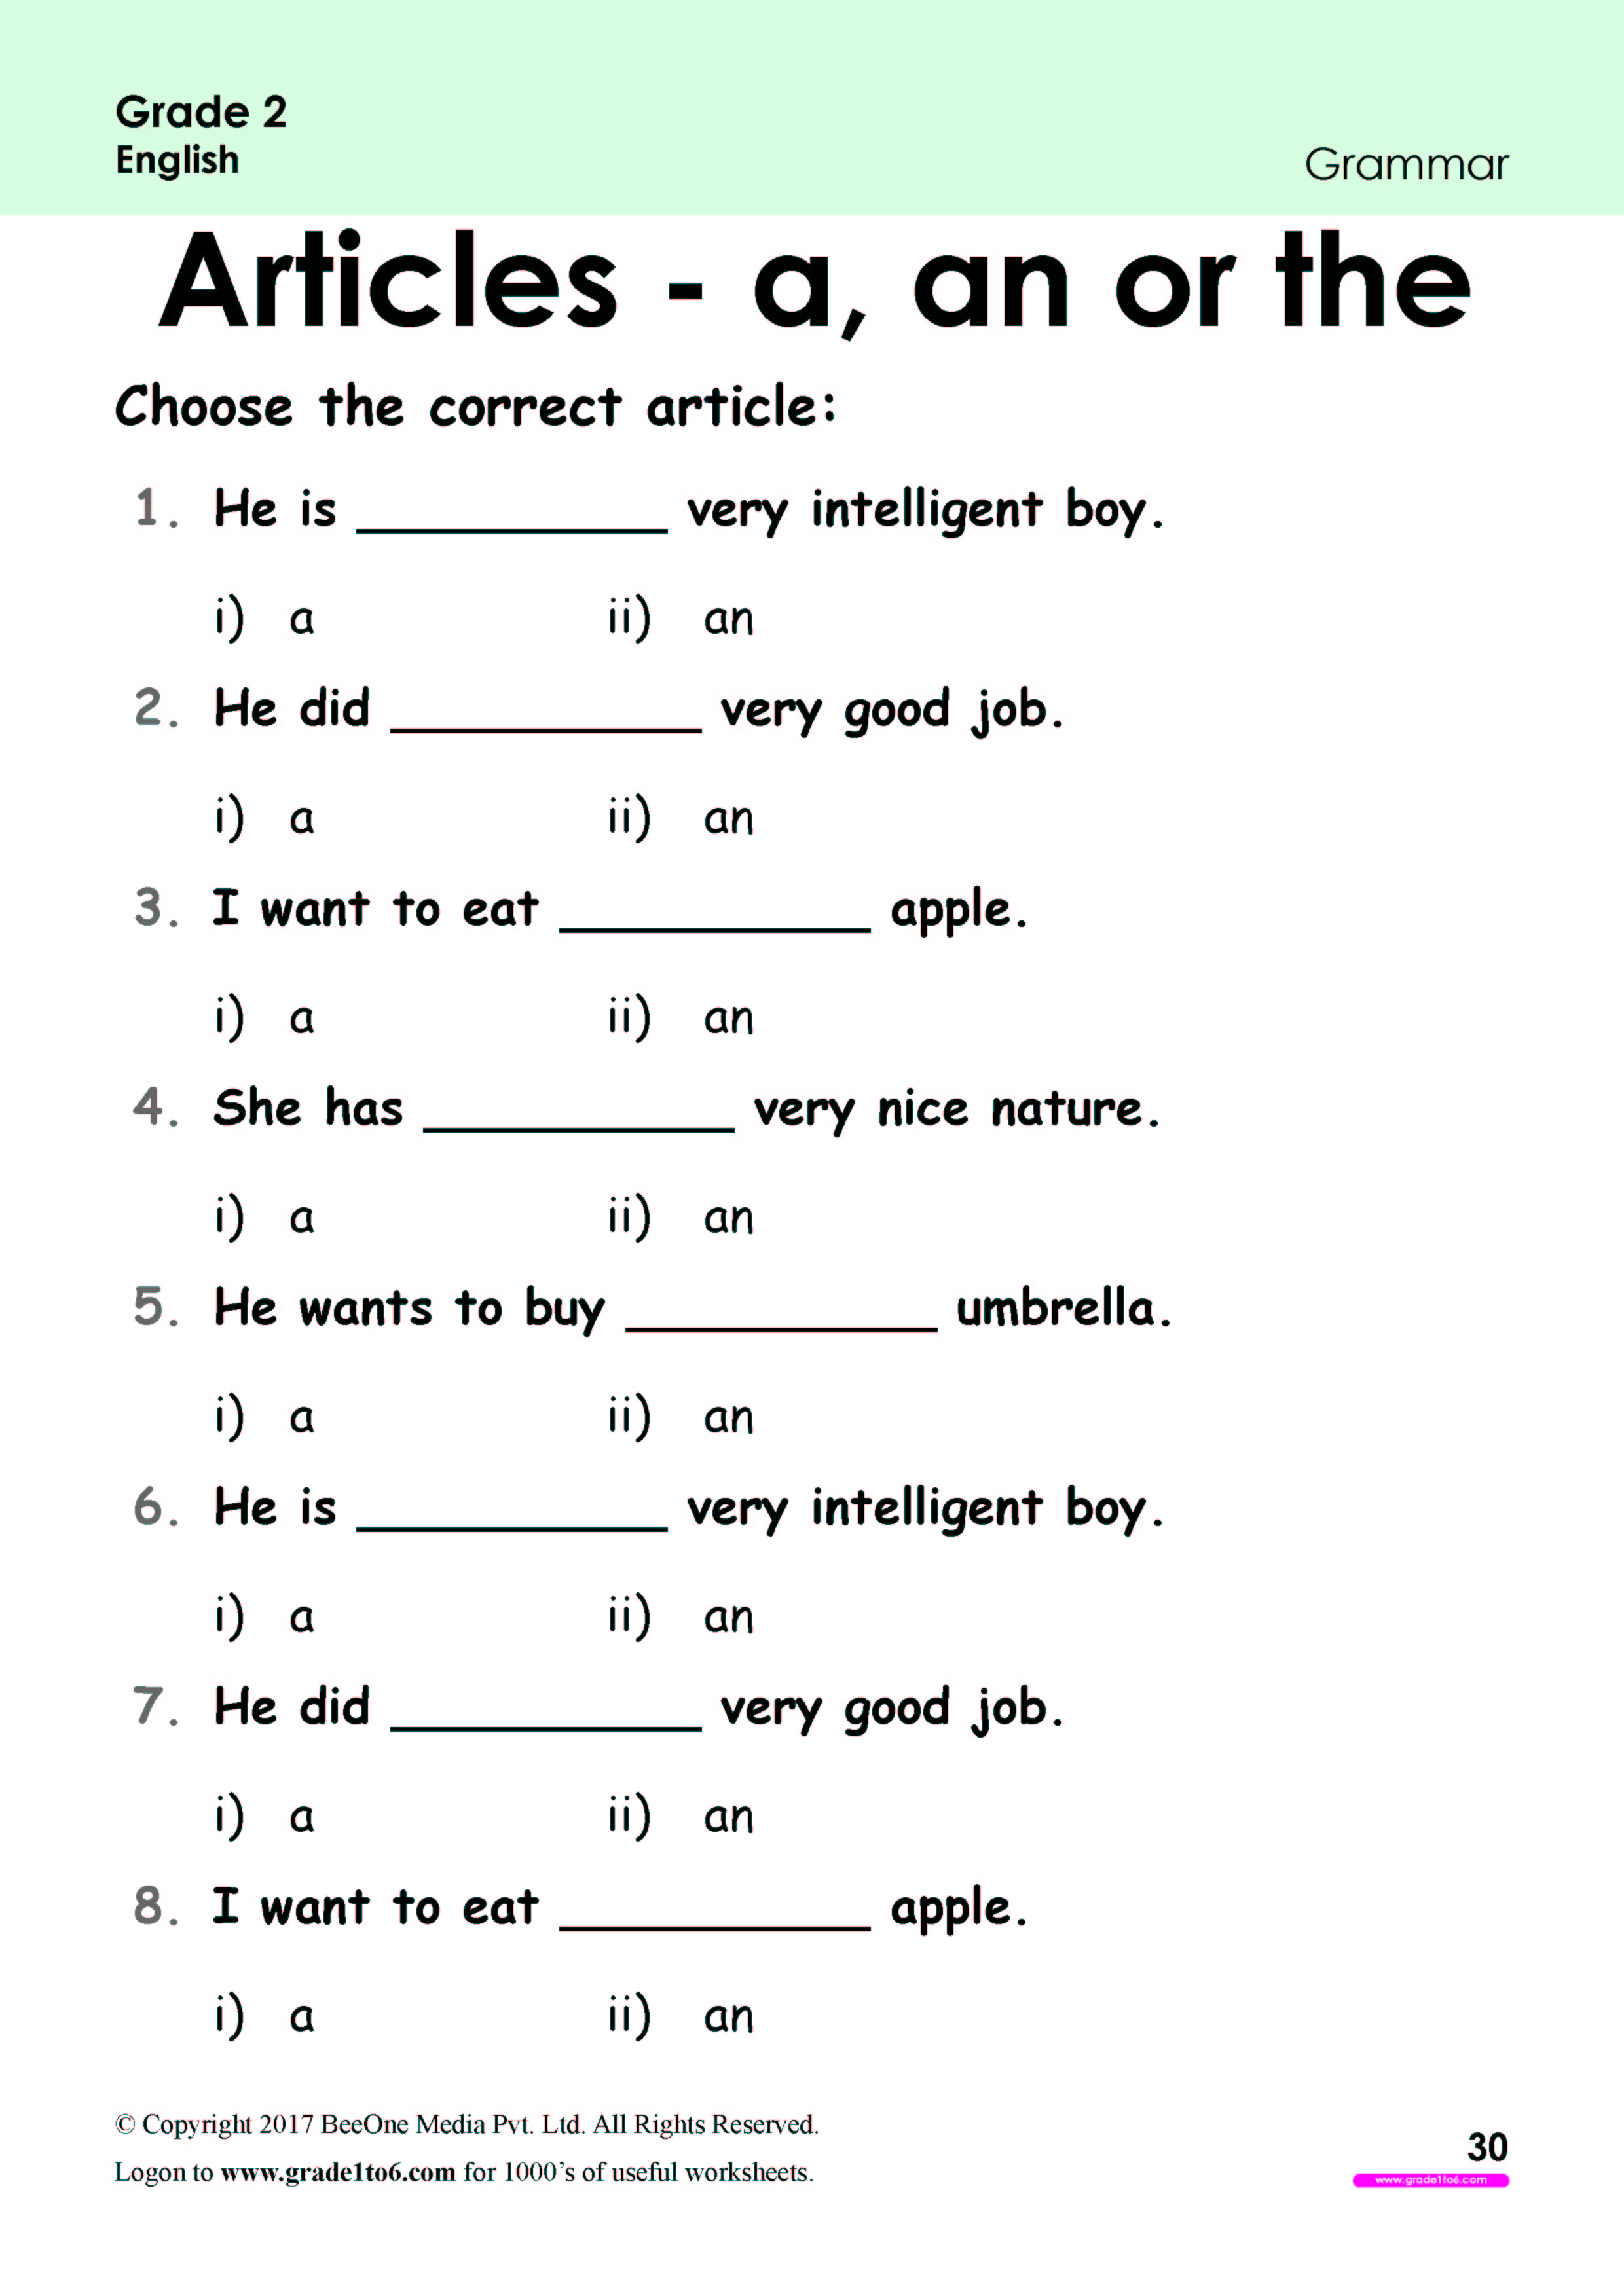 articles-worksheets-www-grade1to6